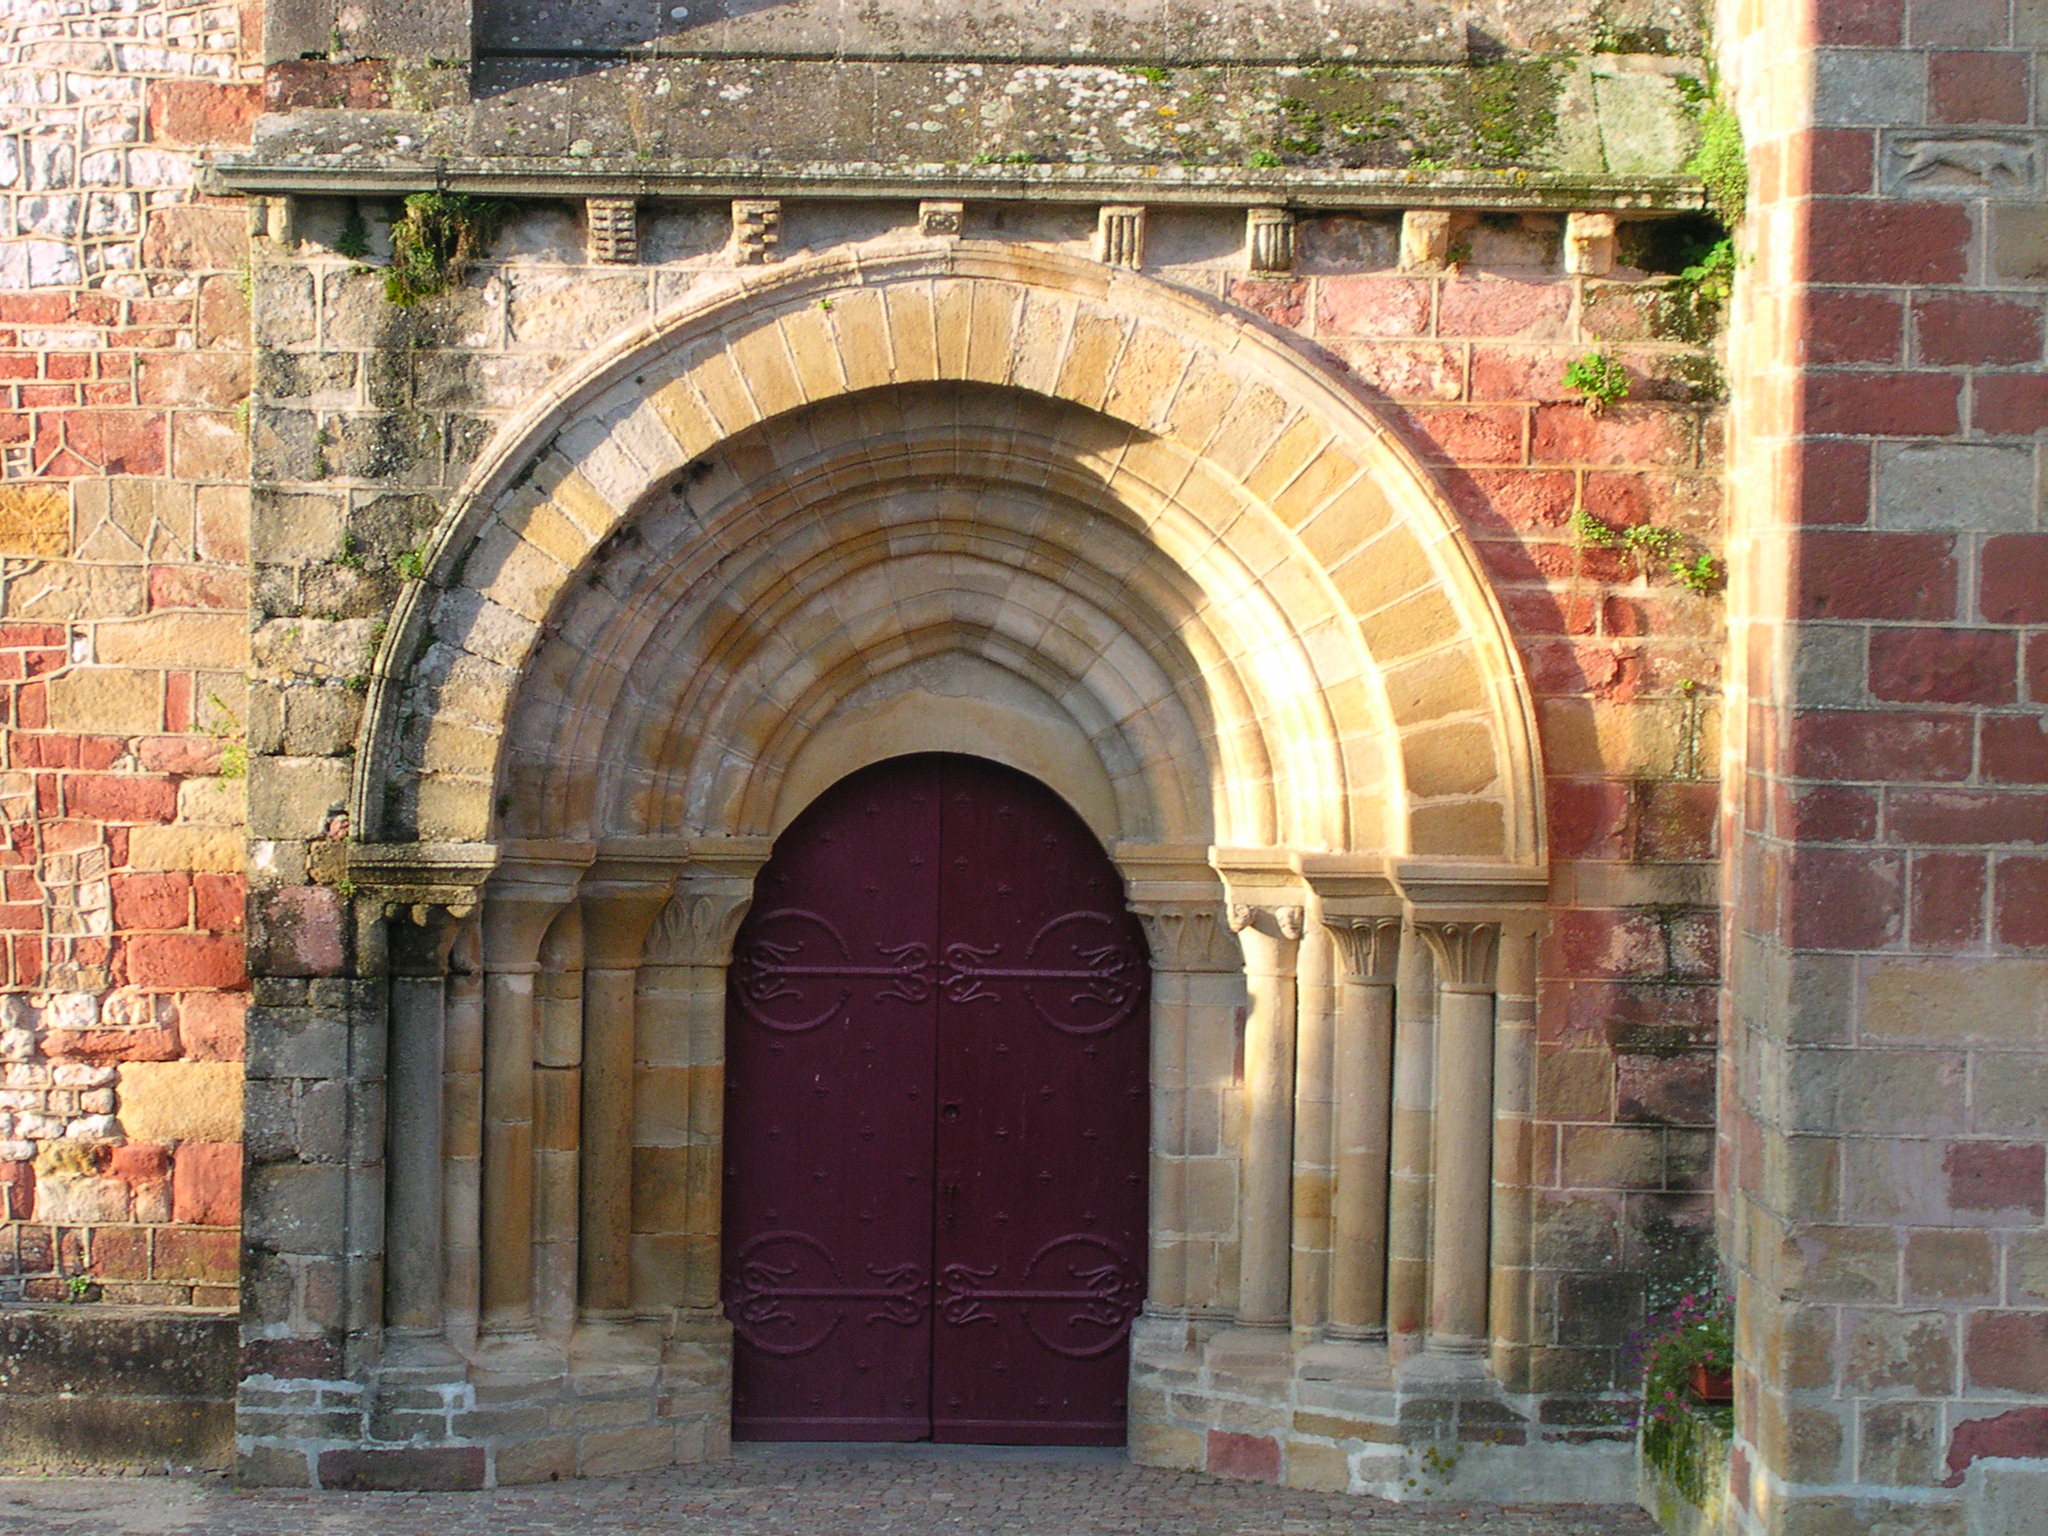 a stone and brick archway above a purple door